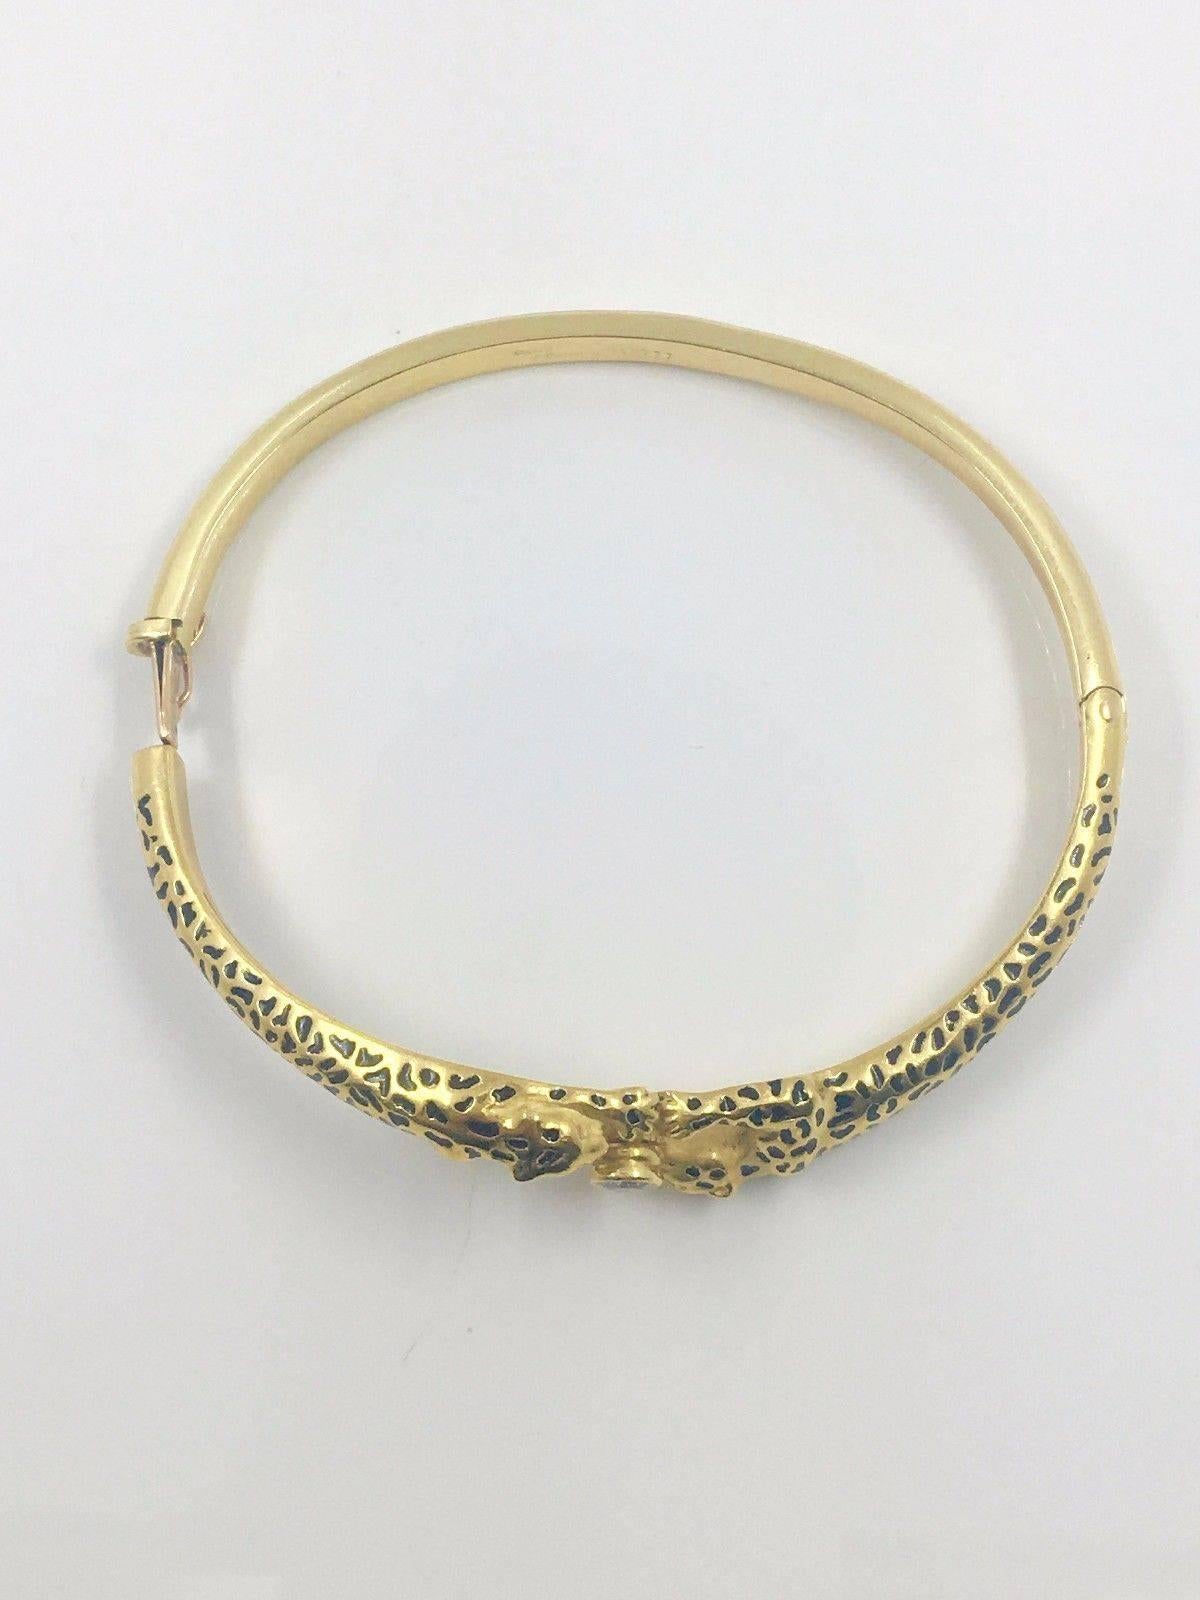 Perfect for everyday wear. Double Panthers holding each others grip with a 0.5 ct diamond at the center of their arms meetings. Beautiful and shiny yellow gold. Pairs well with other yellow gold and diamond bracelets, such as our Cartier LOVE